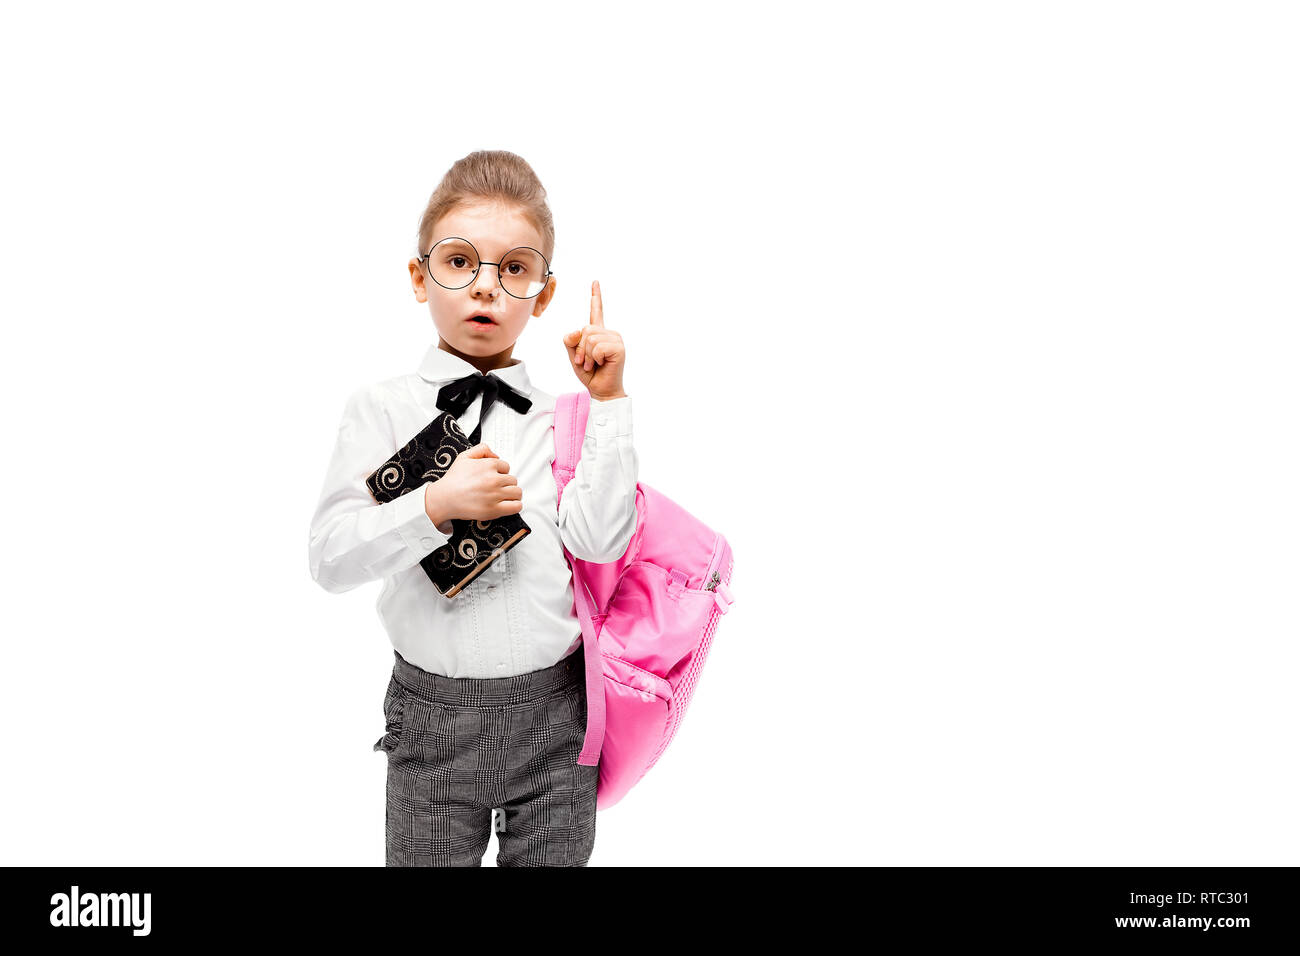 Back to school. Beautiful little girl dressed like a School girl - in white shirt and gray pants, rounded glasses, hold a book, school bag and posing like model points finger up. Isolated on white. Stock Photo